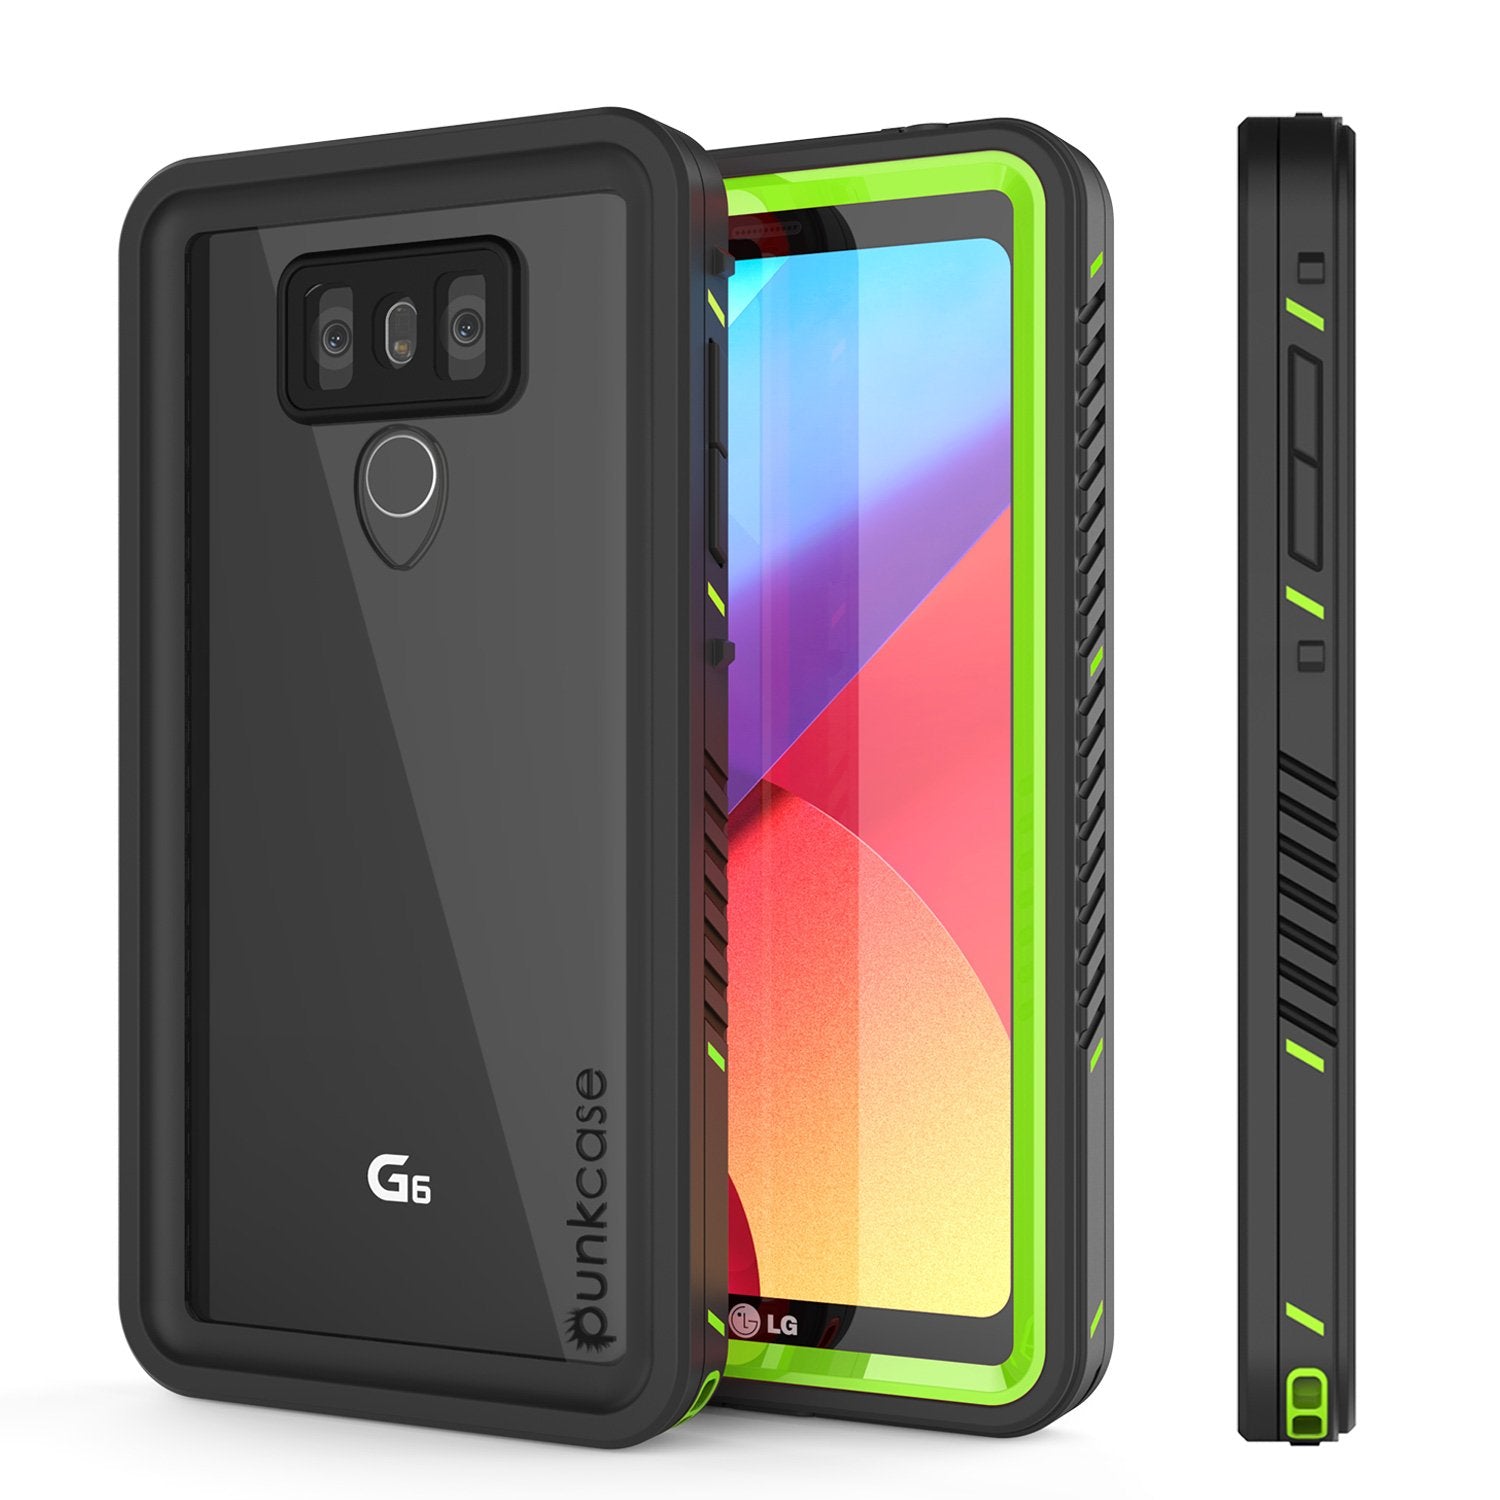 LG G6 Waterproof Case, Punkcase [Extreme Series] [Slim Fit] [IP68 Certified] [Shockproof] [Snowproof] [Dirproof] Armor Cover W/ Built In Screen Protector for LG G6 [GREEN]